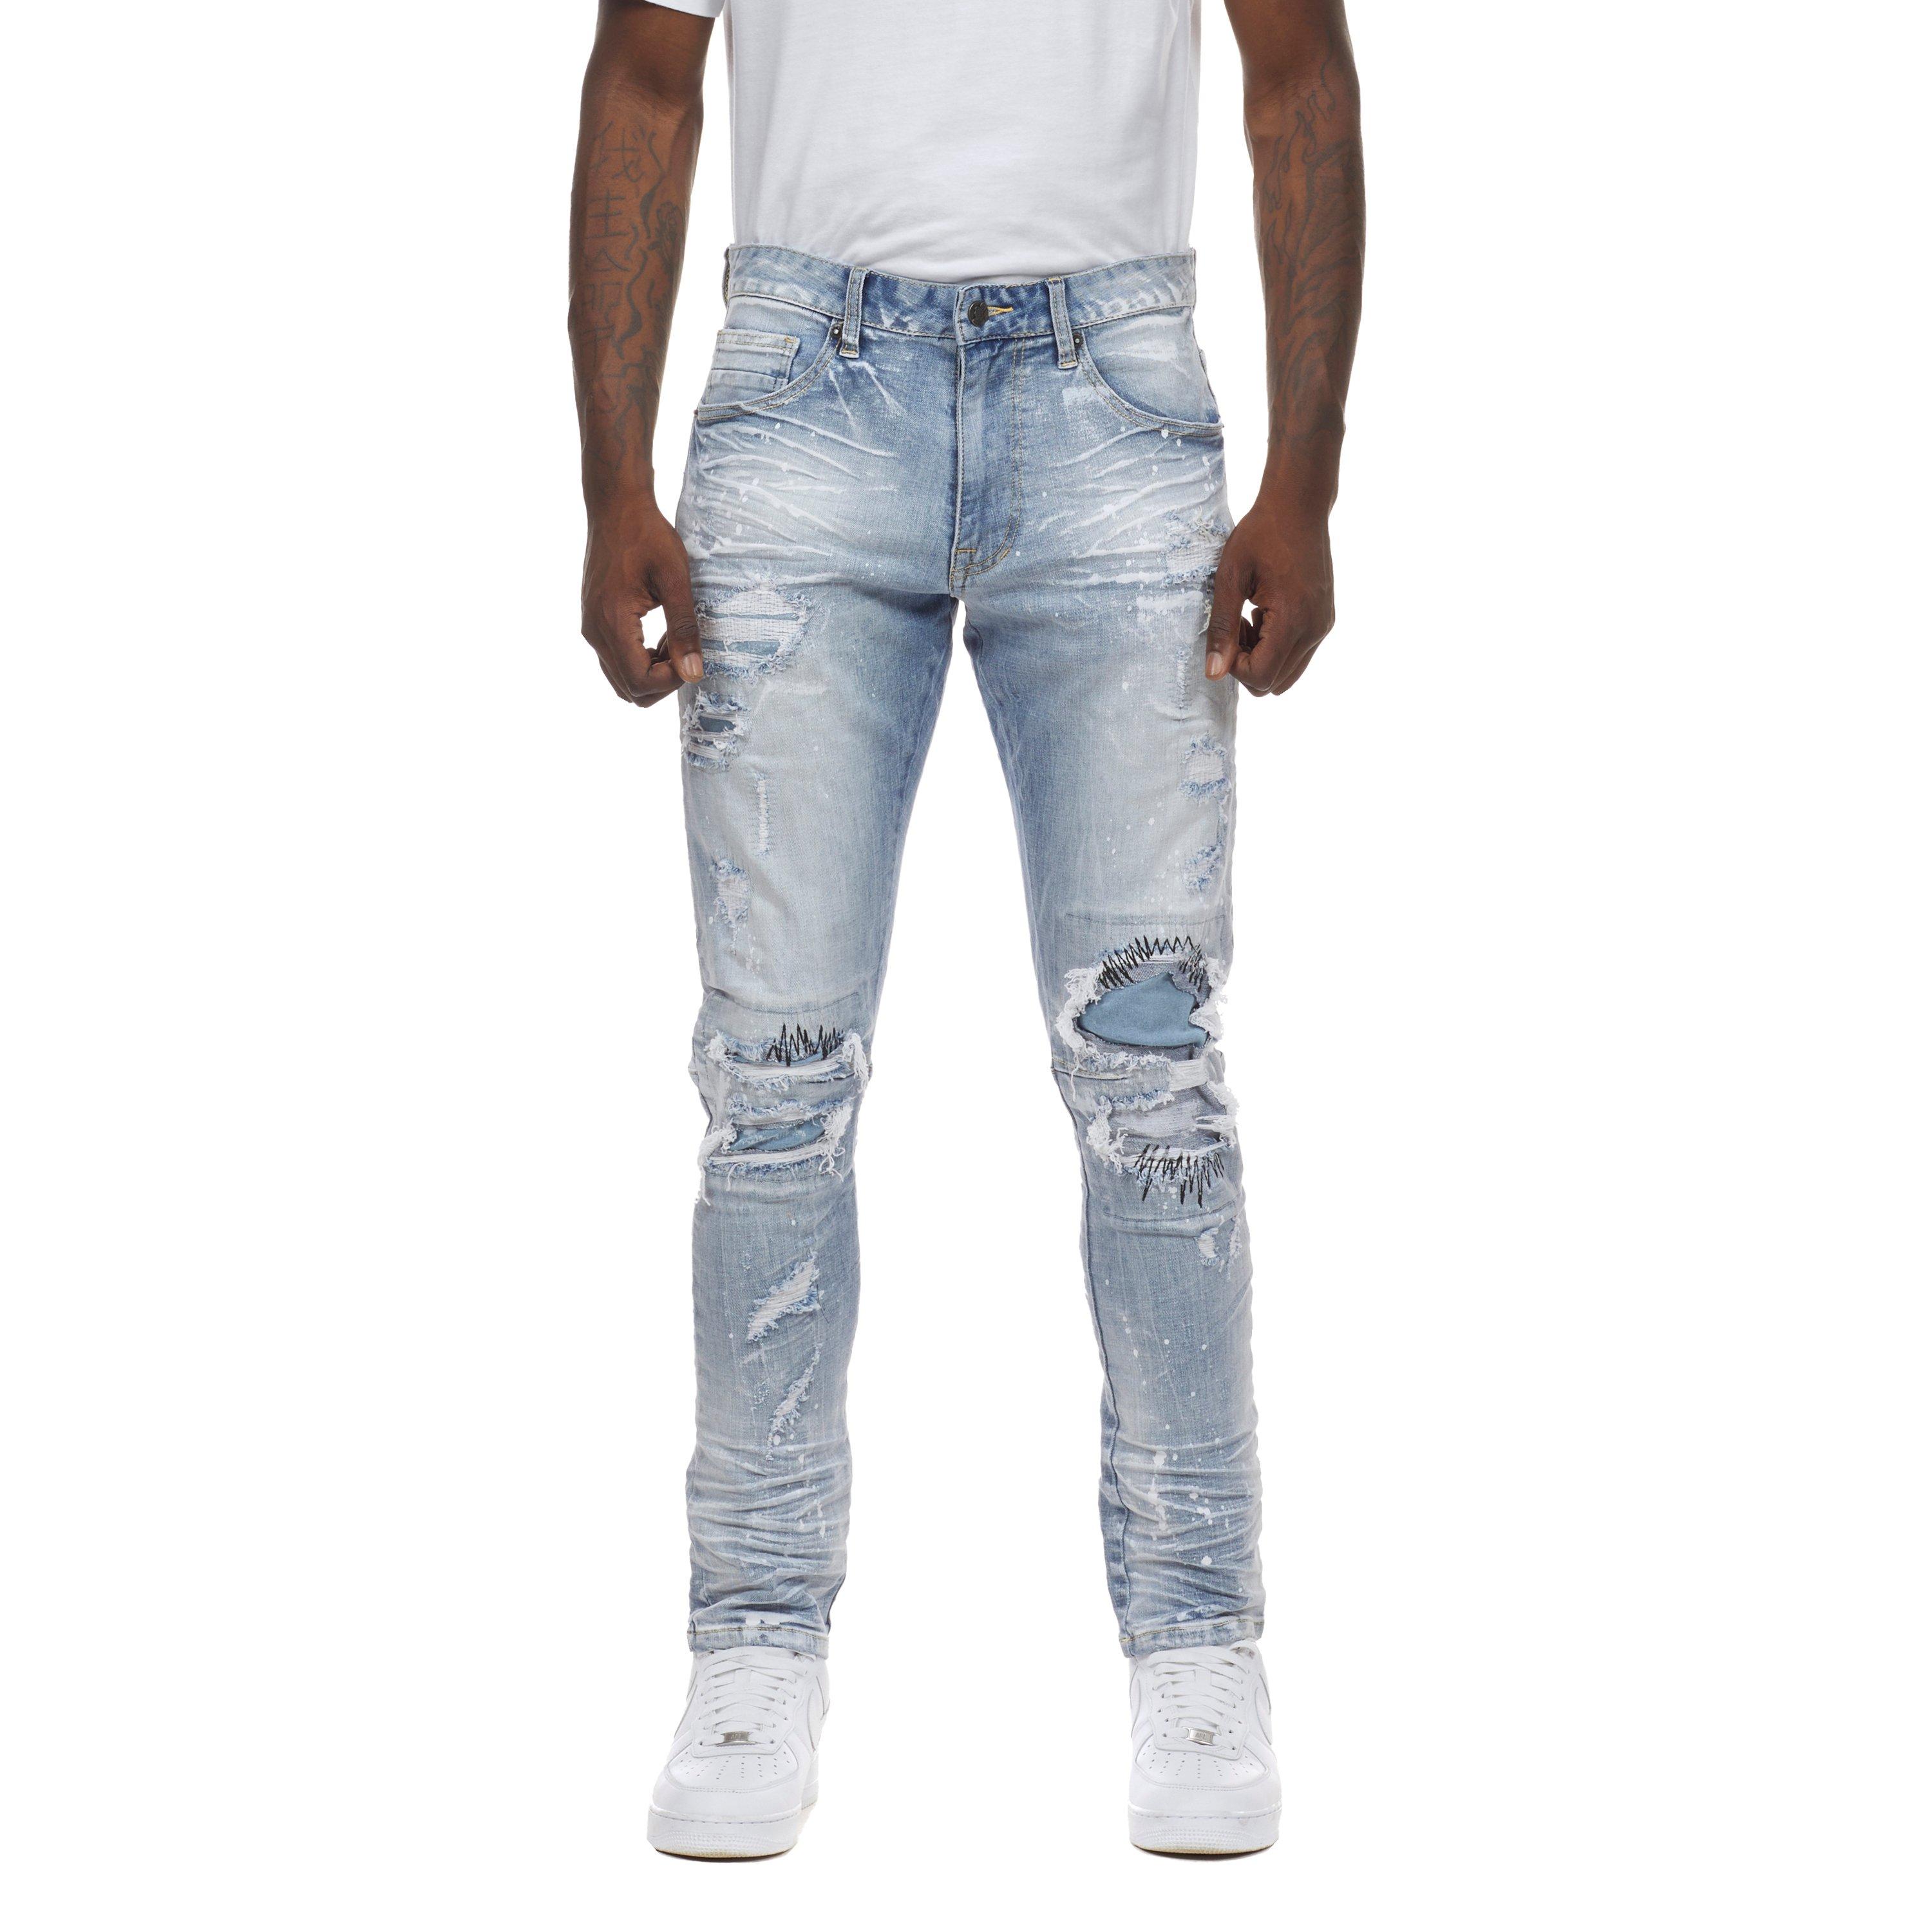 jeans to wear with jordans 1